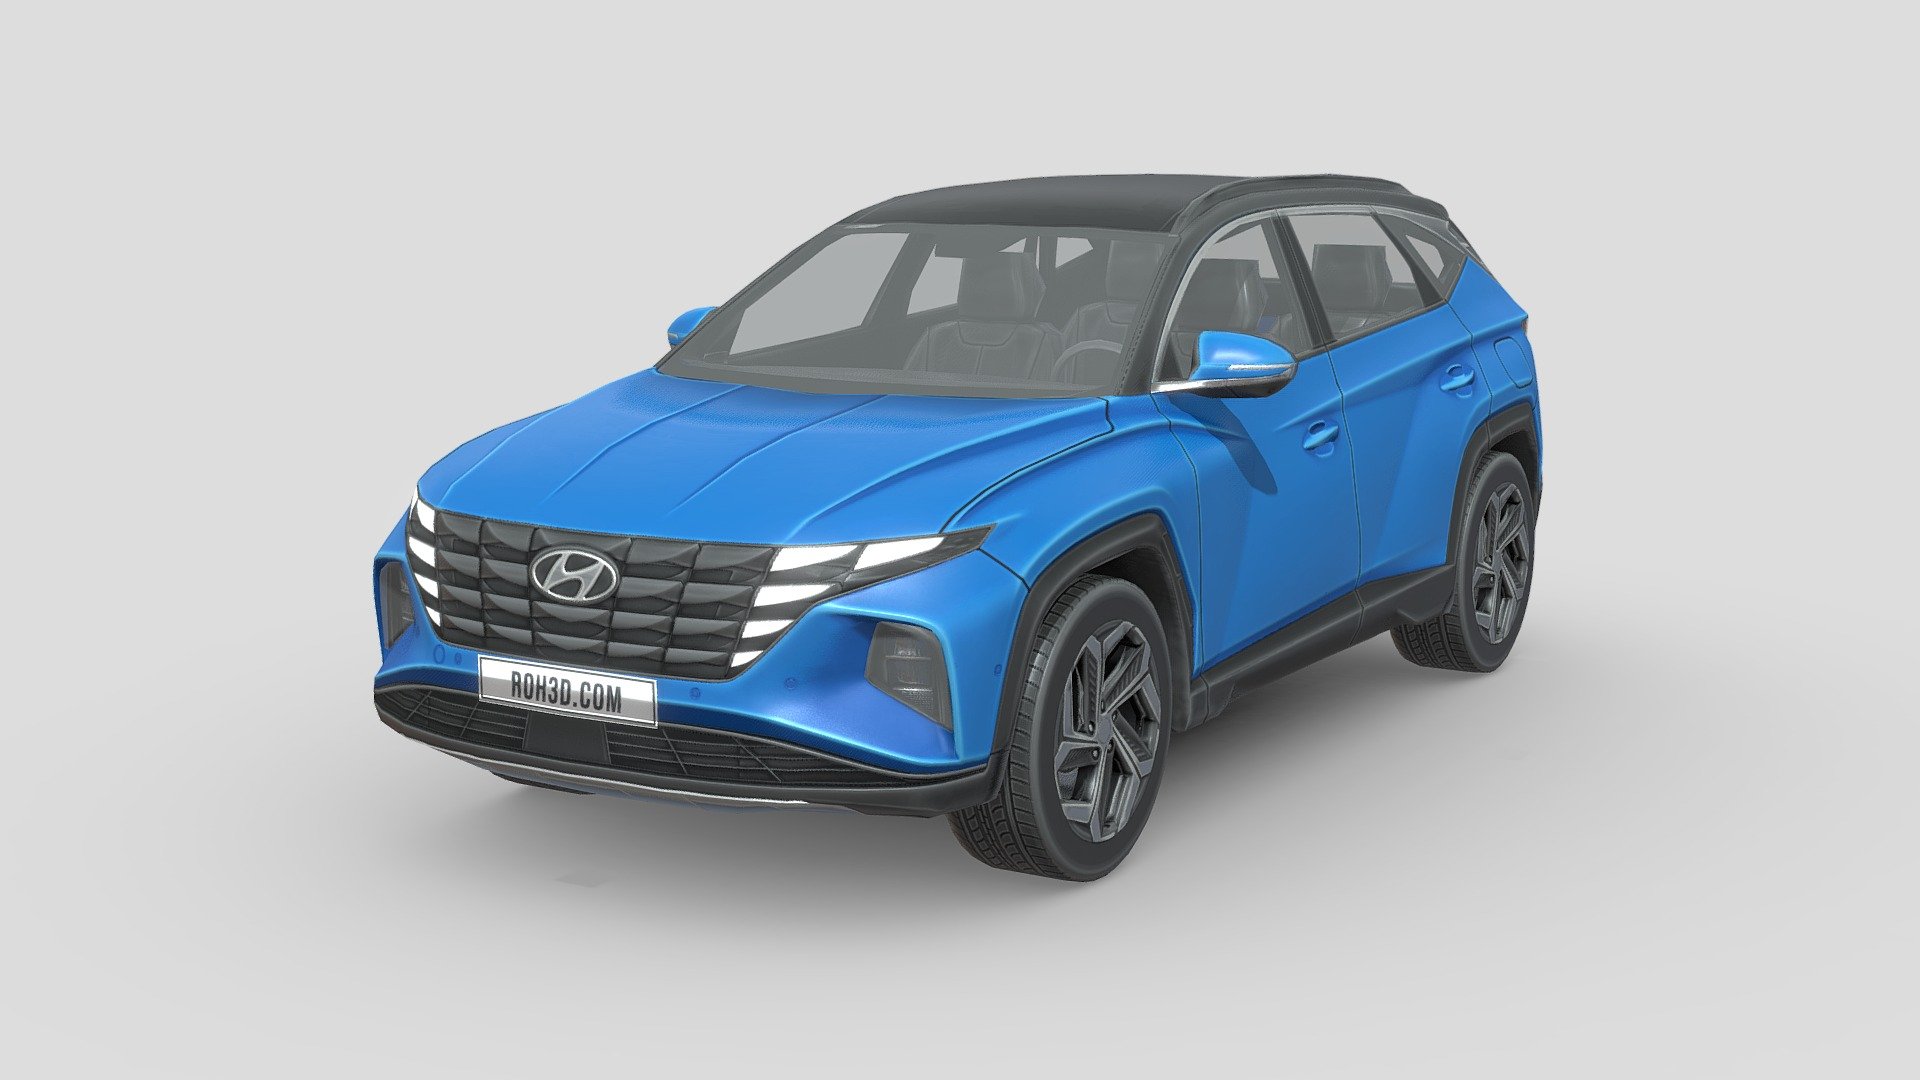 Low Poly Hyundai Tucson 2021, clean geometry with only 7K polys. It also included PSD files, so you can easily change the color.

The Hyundai Tucson (Korean: 현대 투싼) (pronounced Tu-són) is a compact crossover SUV (C-segment) produced by the South Korean manufacturer Hyundai since 2004. In the brand's lineup, the Tucson is positioned below the Santa Fe, and above the Kona and Creta. It is named after the city of Tucson, Arizona. The second-generation model has been marketed as the Hyundai ix35 in several markets, including Europe, Australia and China, before reverting to Tucson for the third-generation.

The Tucson is the best-selling Hyundai SUV model, with more than 7 million units sold globally since it launched in 2004. Of these, 1.4 million units have been sold in Europe 3d model